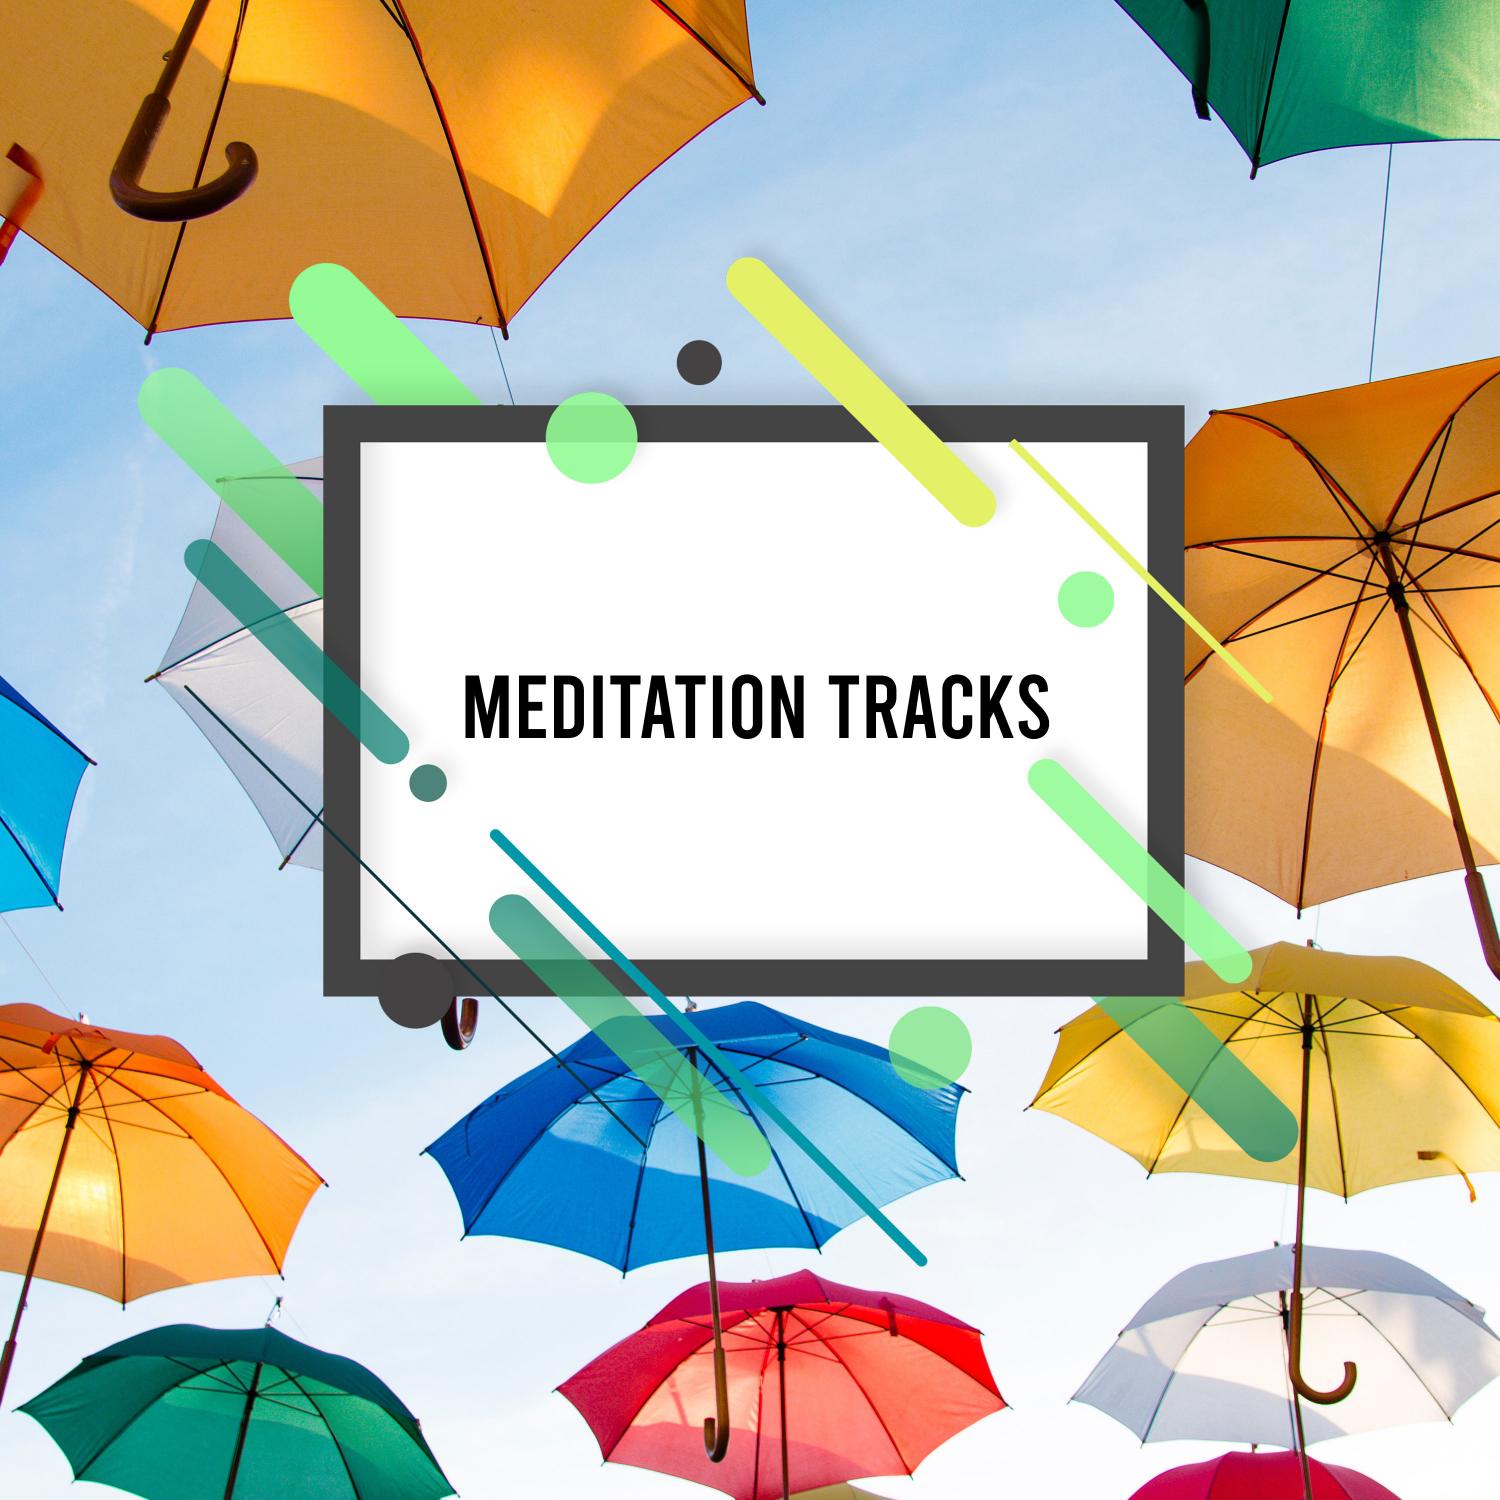 10 Meditation Tracks, The Best of Mindfulness Yoga and Healing, Massage, Zen, Spa Treatment and Relaxation